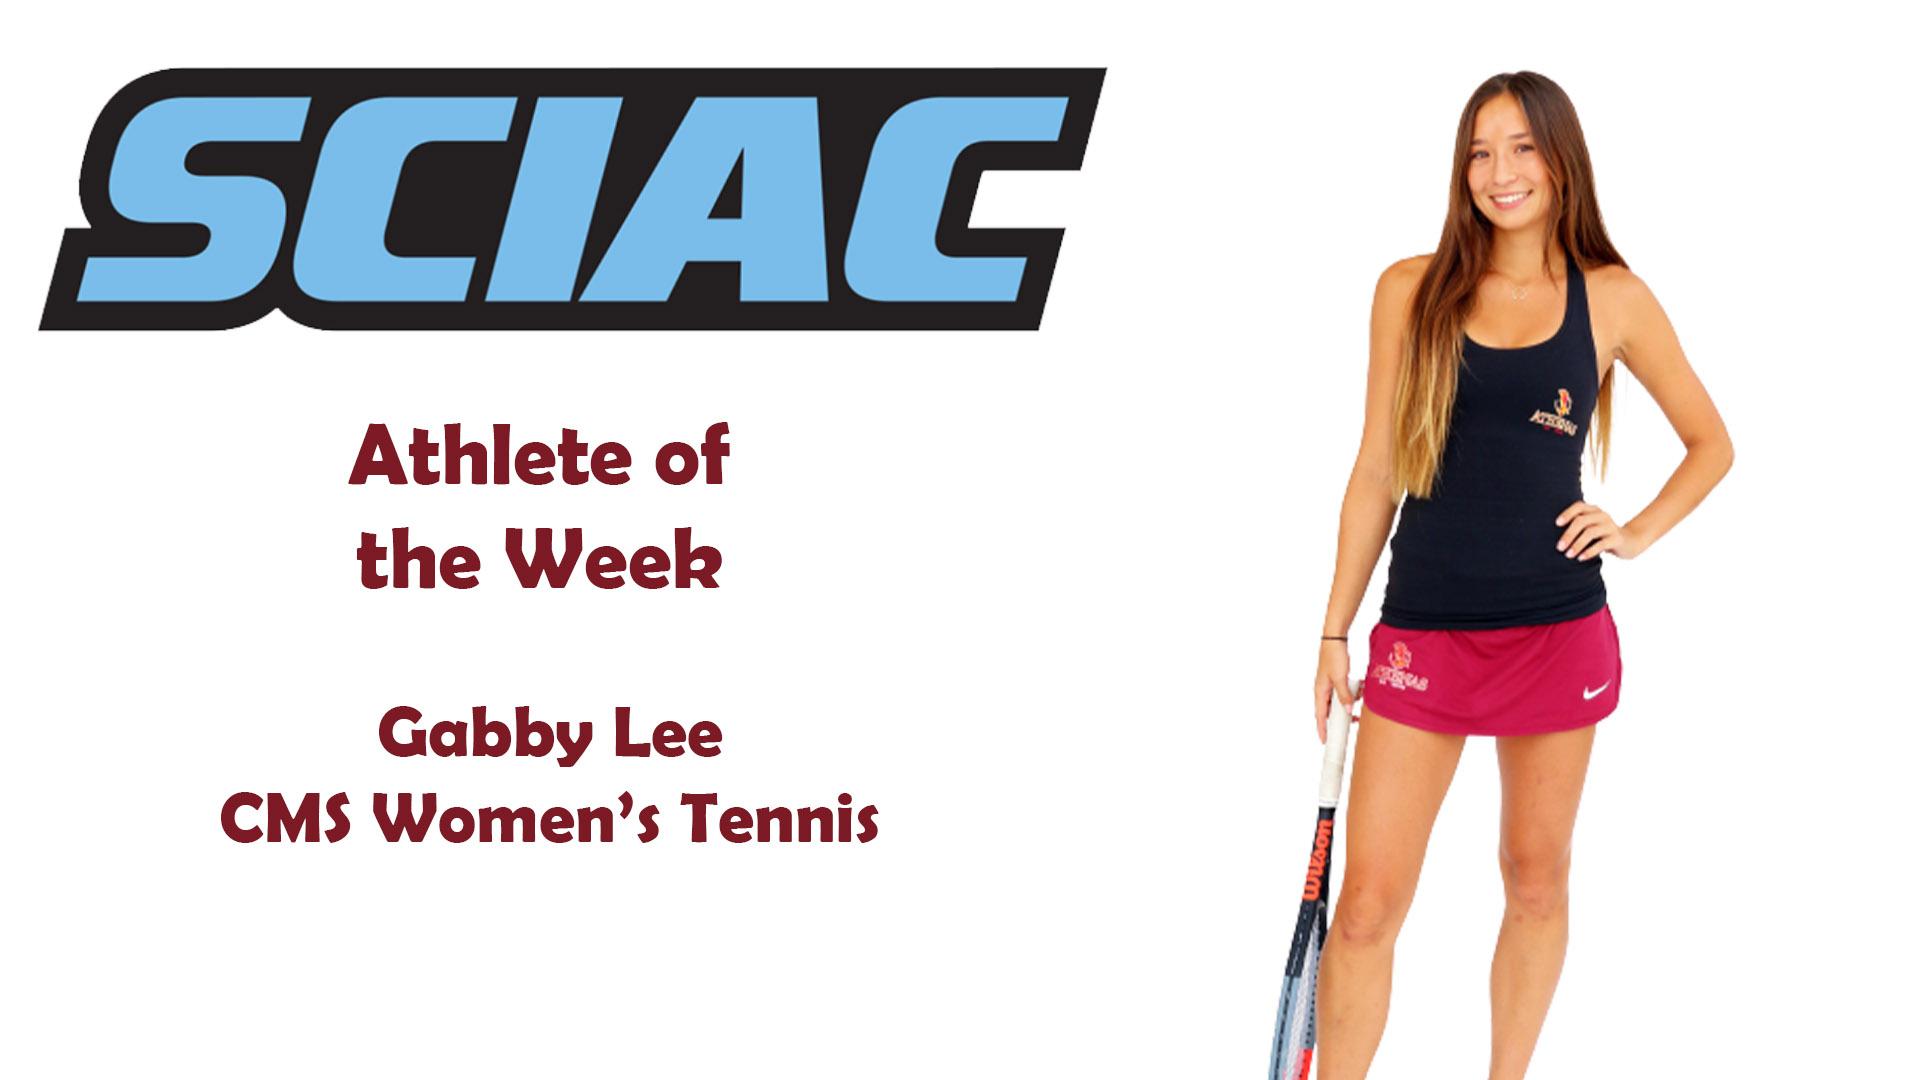 Posed shot of Gabby Lee with the SCIAC logo